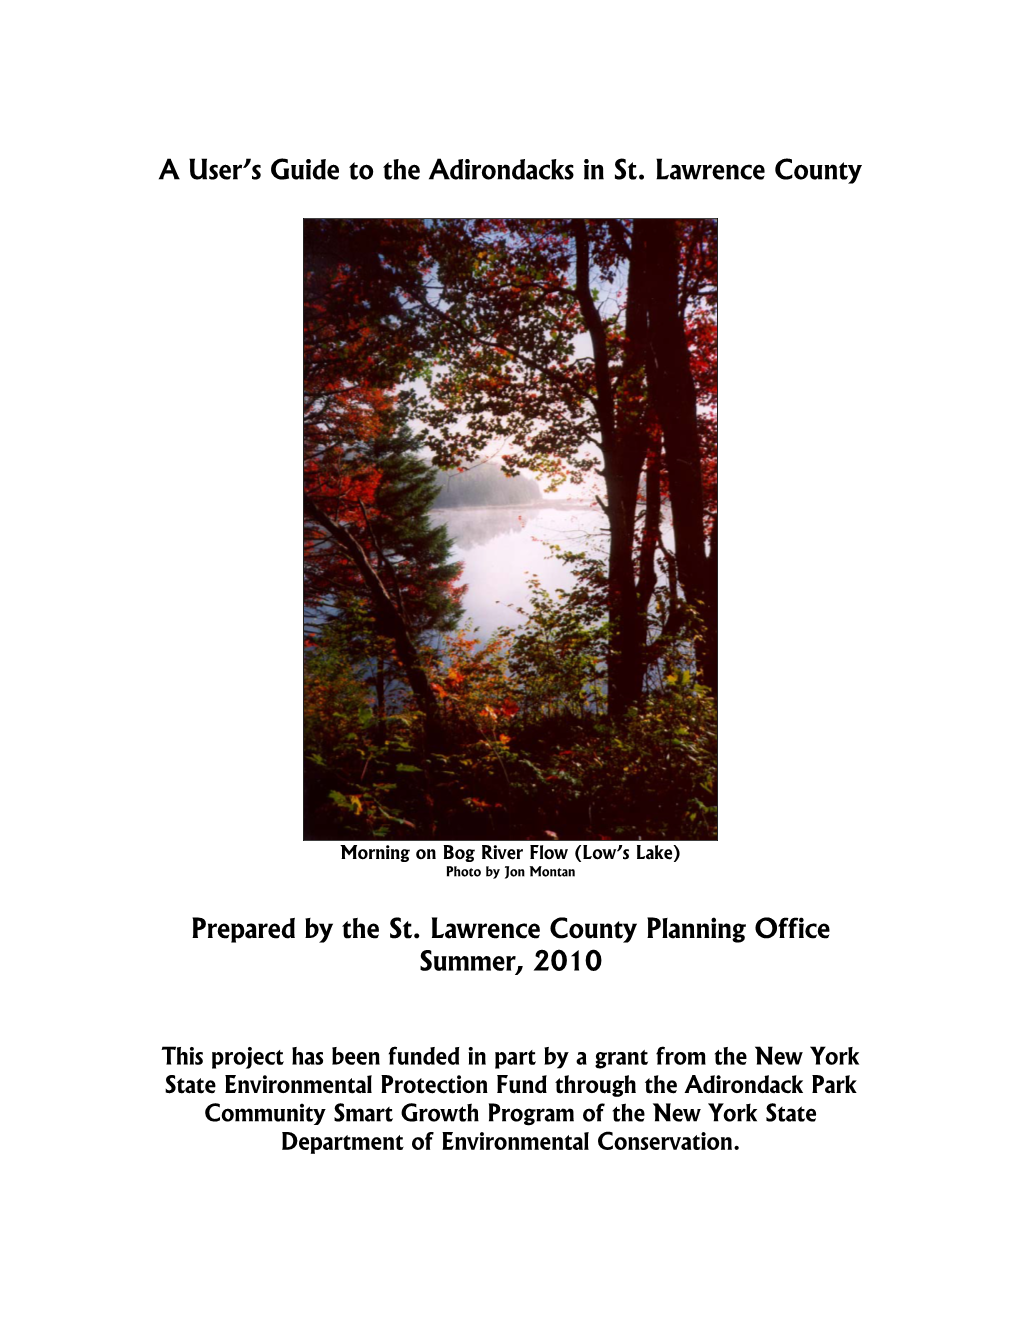 A User's Guide to the Adirondacks in St. Lawrence County Prepared By